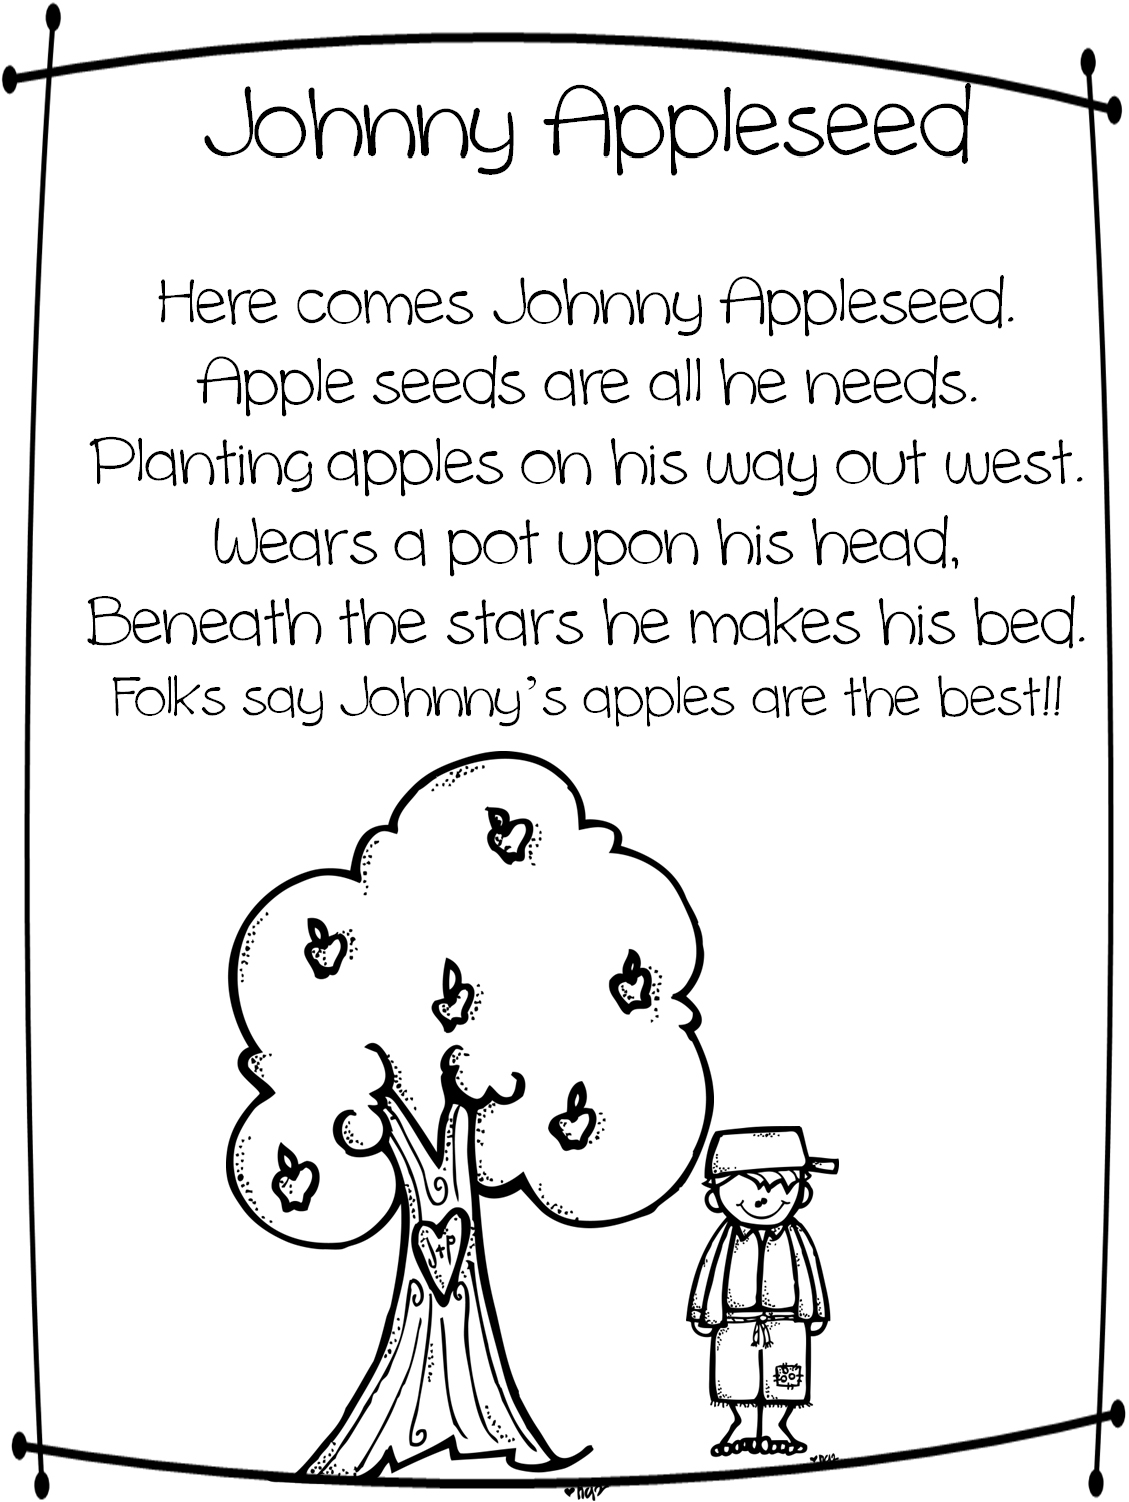 Johnny Appleseed Coloring Pages Best Coloring Pages For Kids